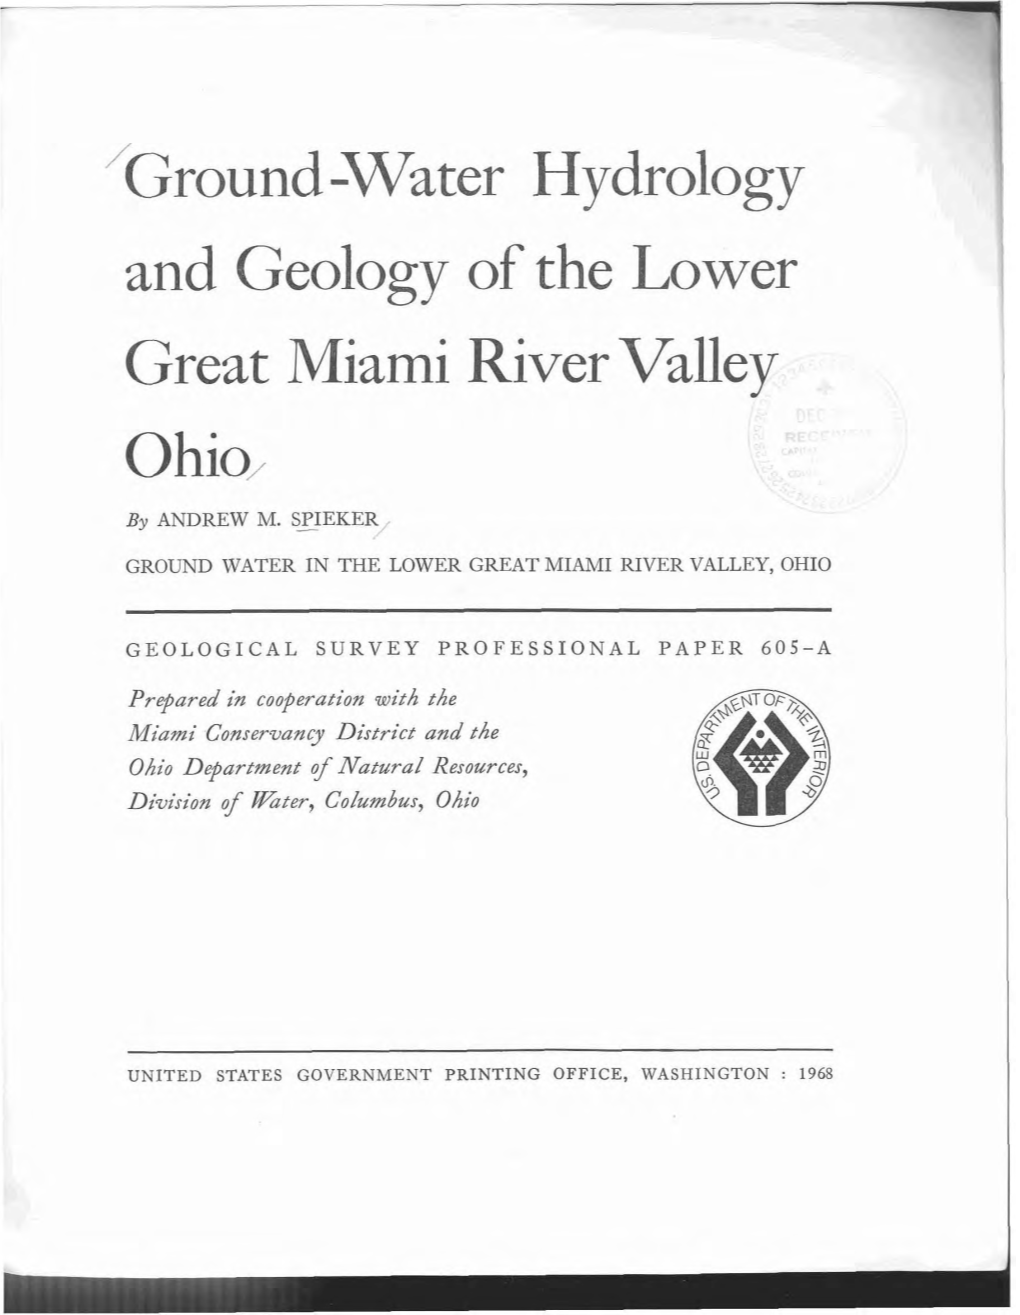 Ground -Water Hydrology and Geology of the Lower Great Miami River Valley